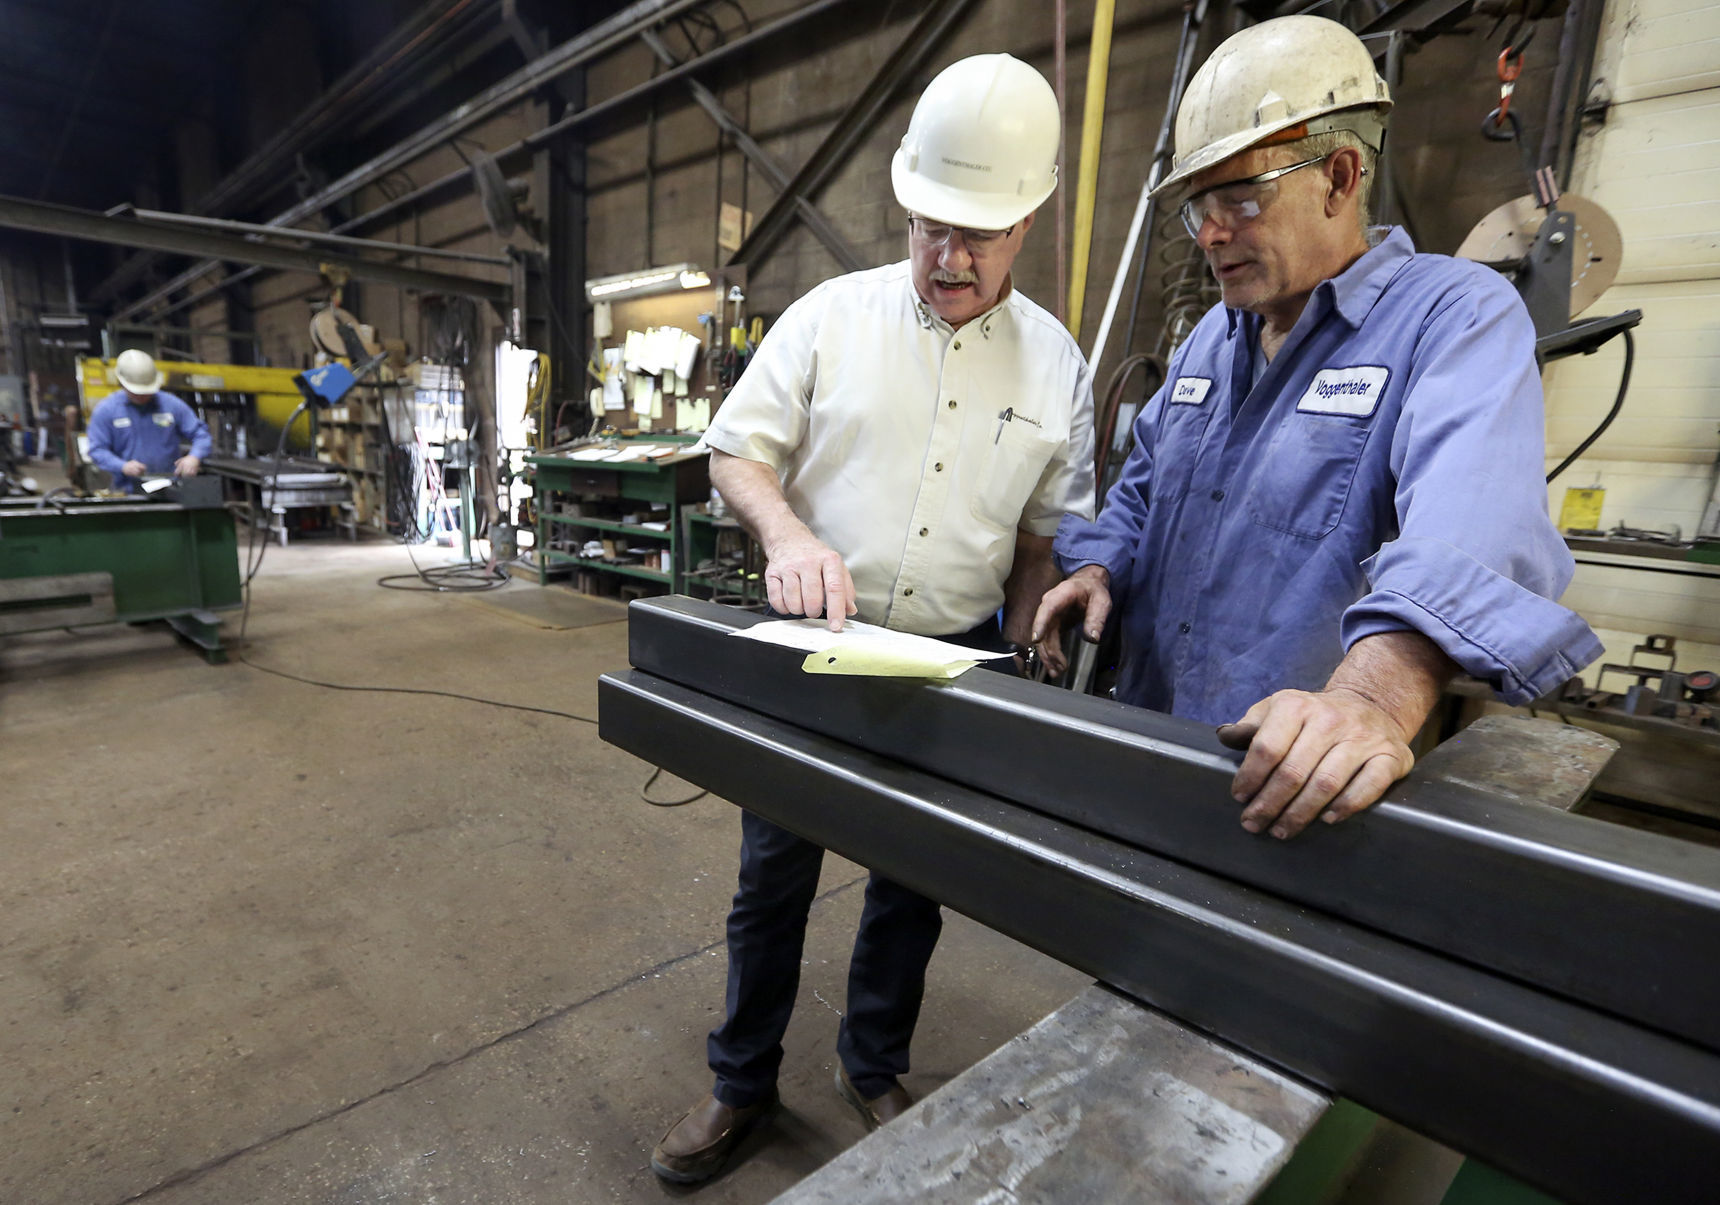 Kevin Kisting (left) and Dave Walsh discuss miter cuts on tube bracing at E.J. Voggenthaler Co. in Dubuque on Wednesday, June 27, 2018.    PHOTO CREDIT: NICKI KOHL